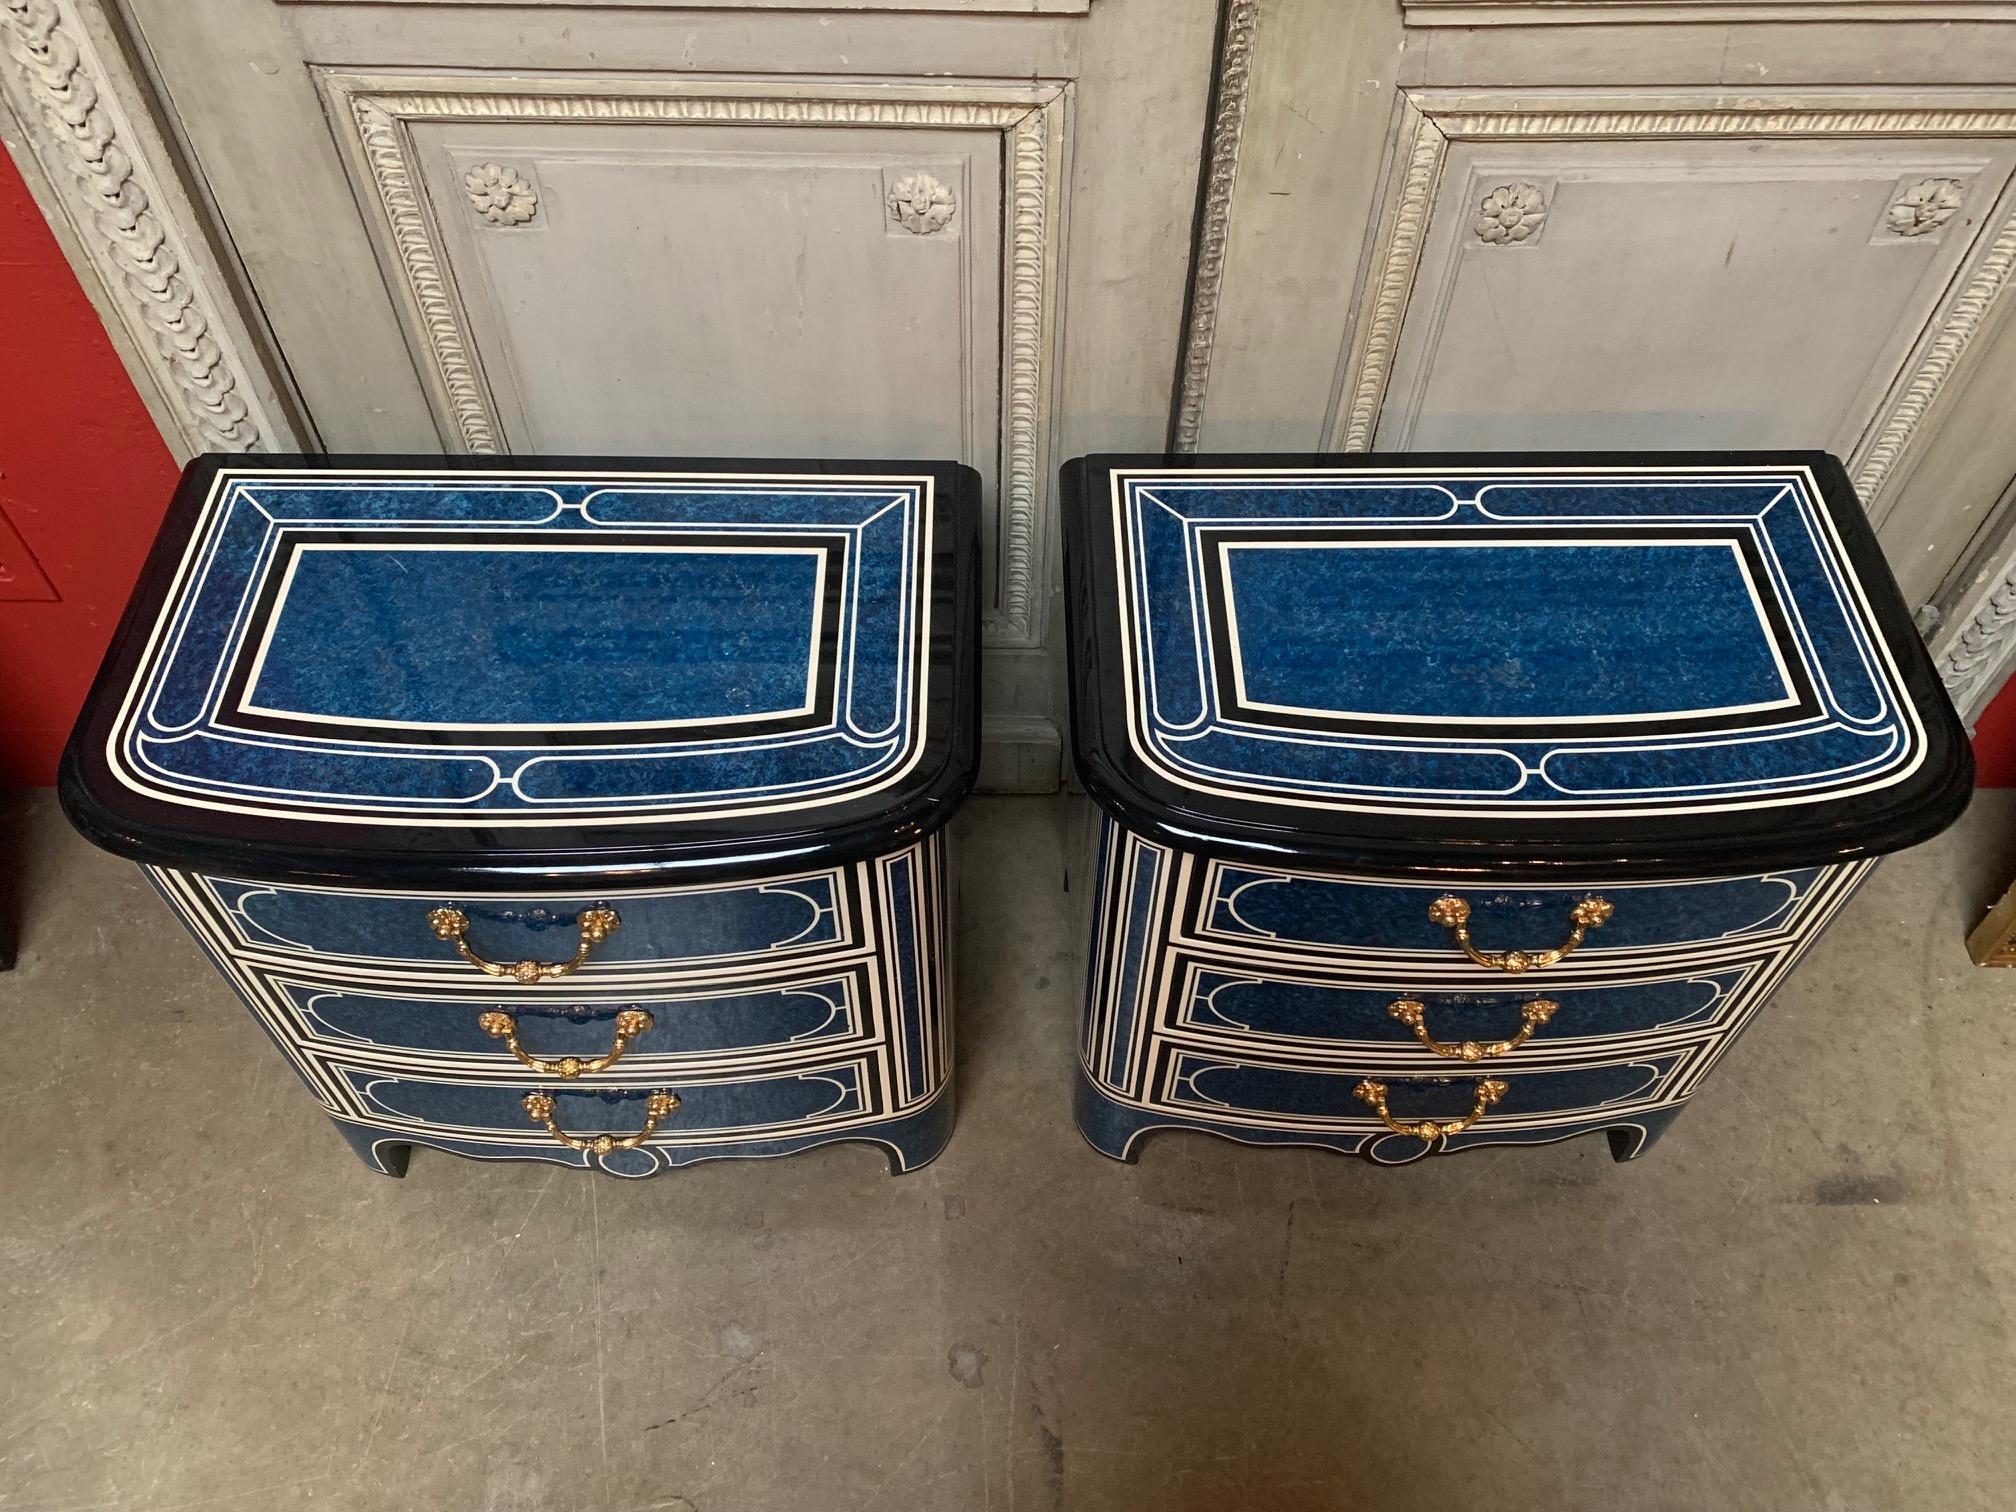 20th Century Pair of French Regence Style Commodes with a Blue and White Laquered Finsish